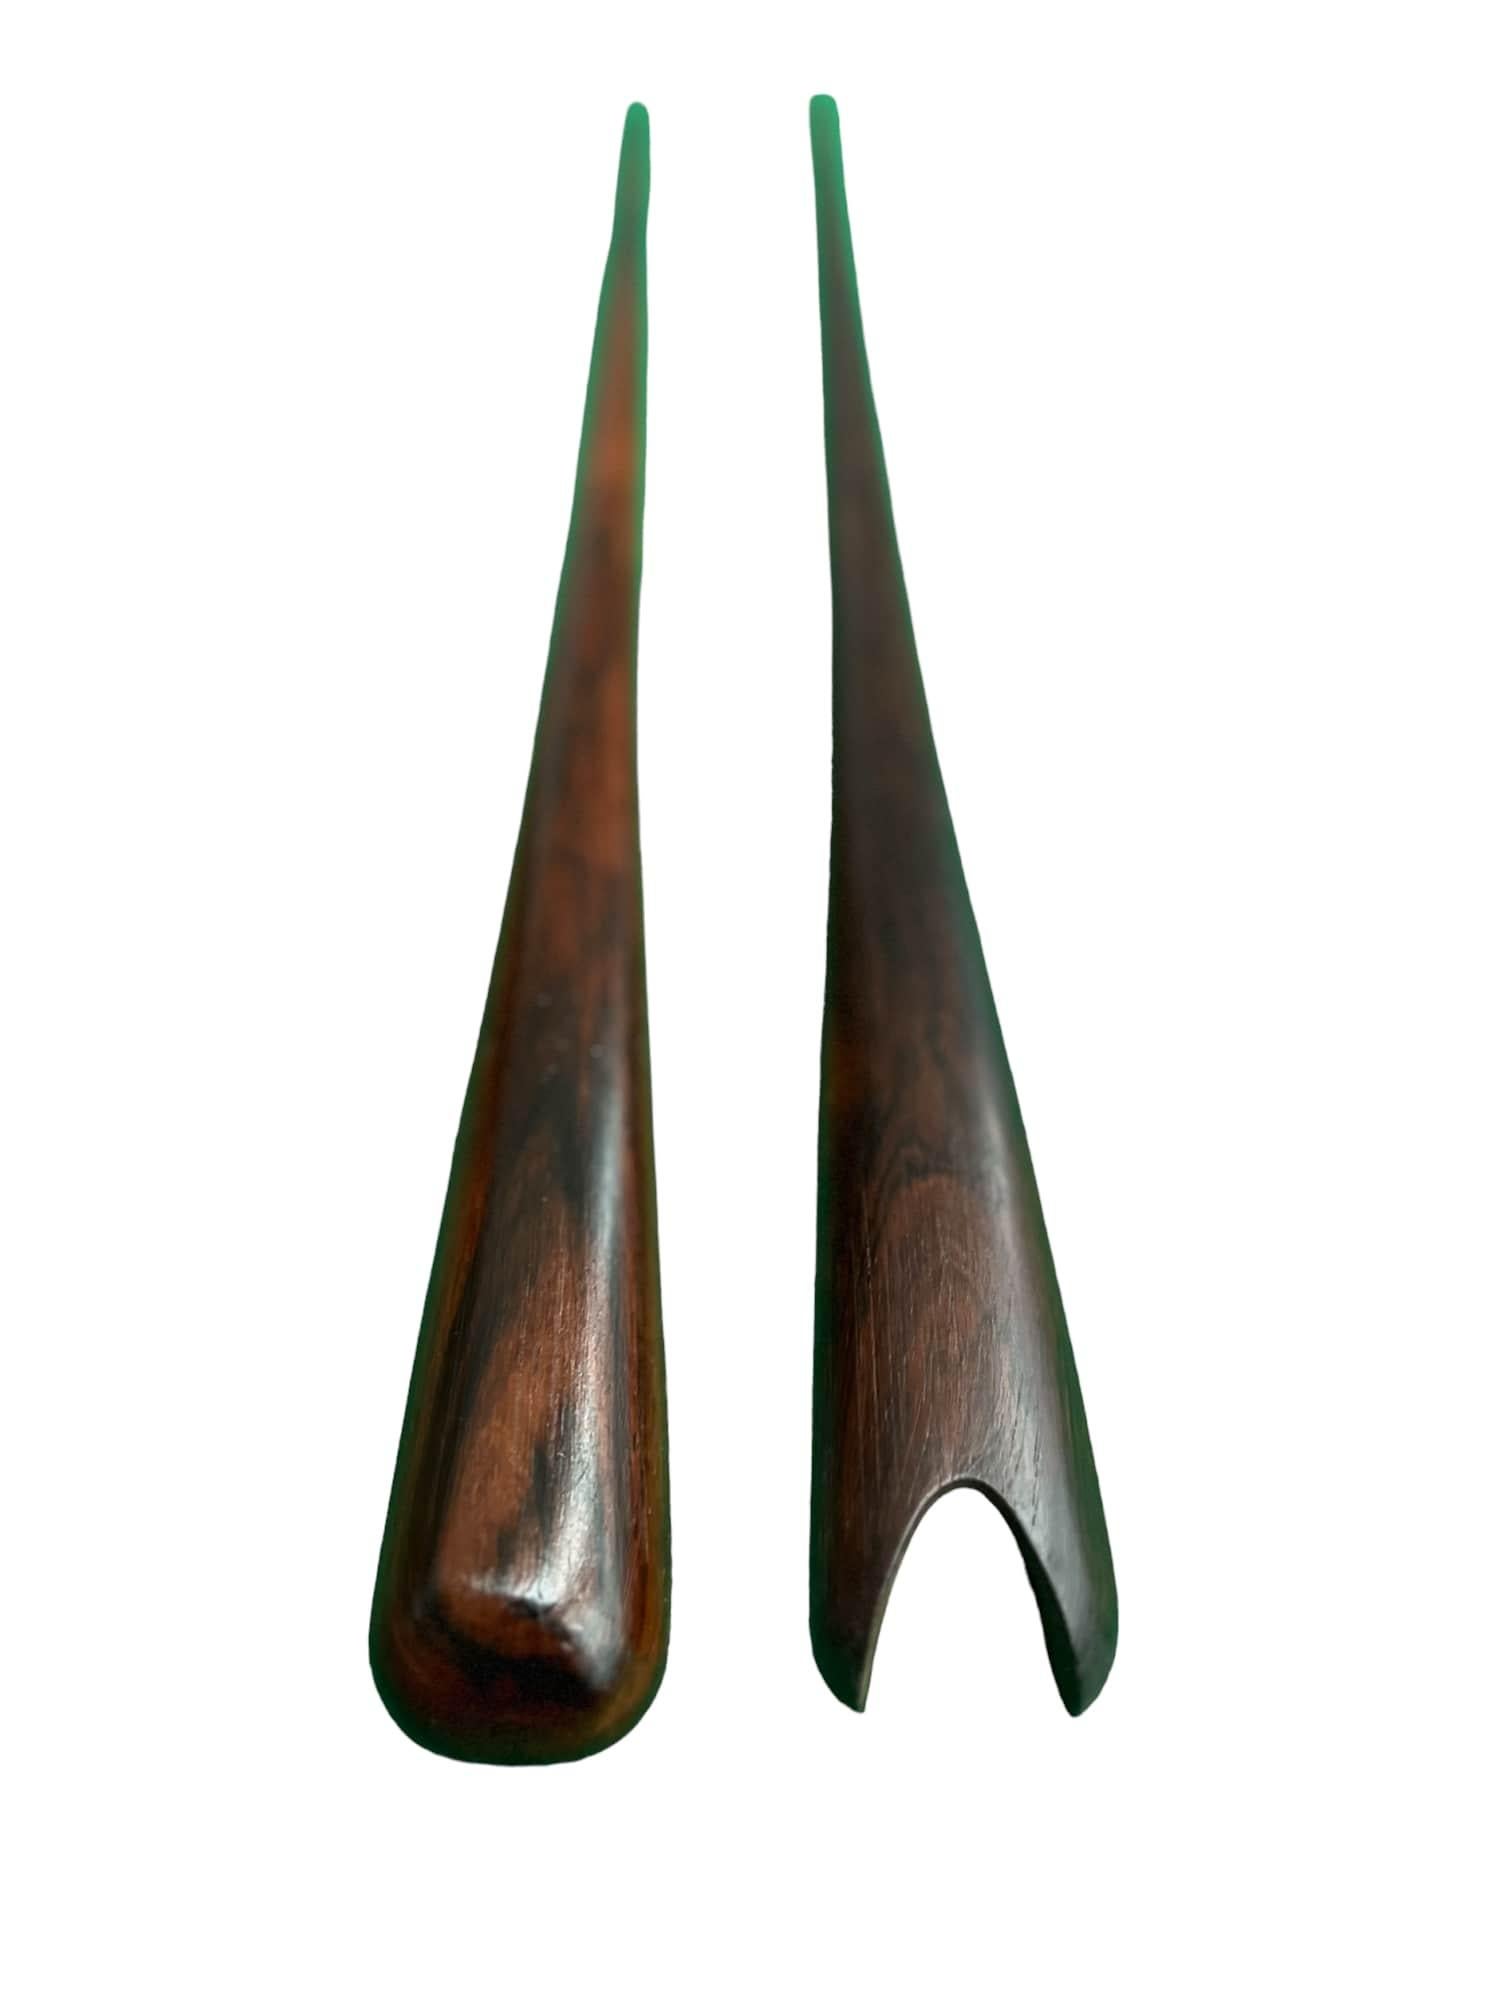 Wood Brazilian Mid-Century Modern Salad Forks in Hardwood, by Jean Gillon, 1960s For Sale